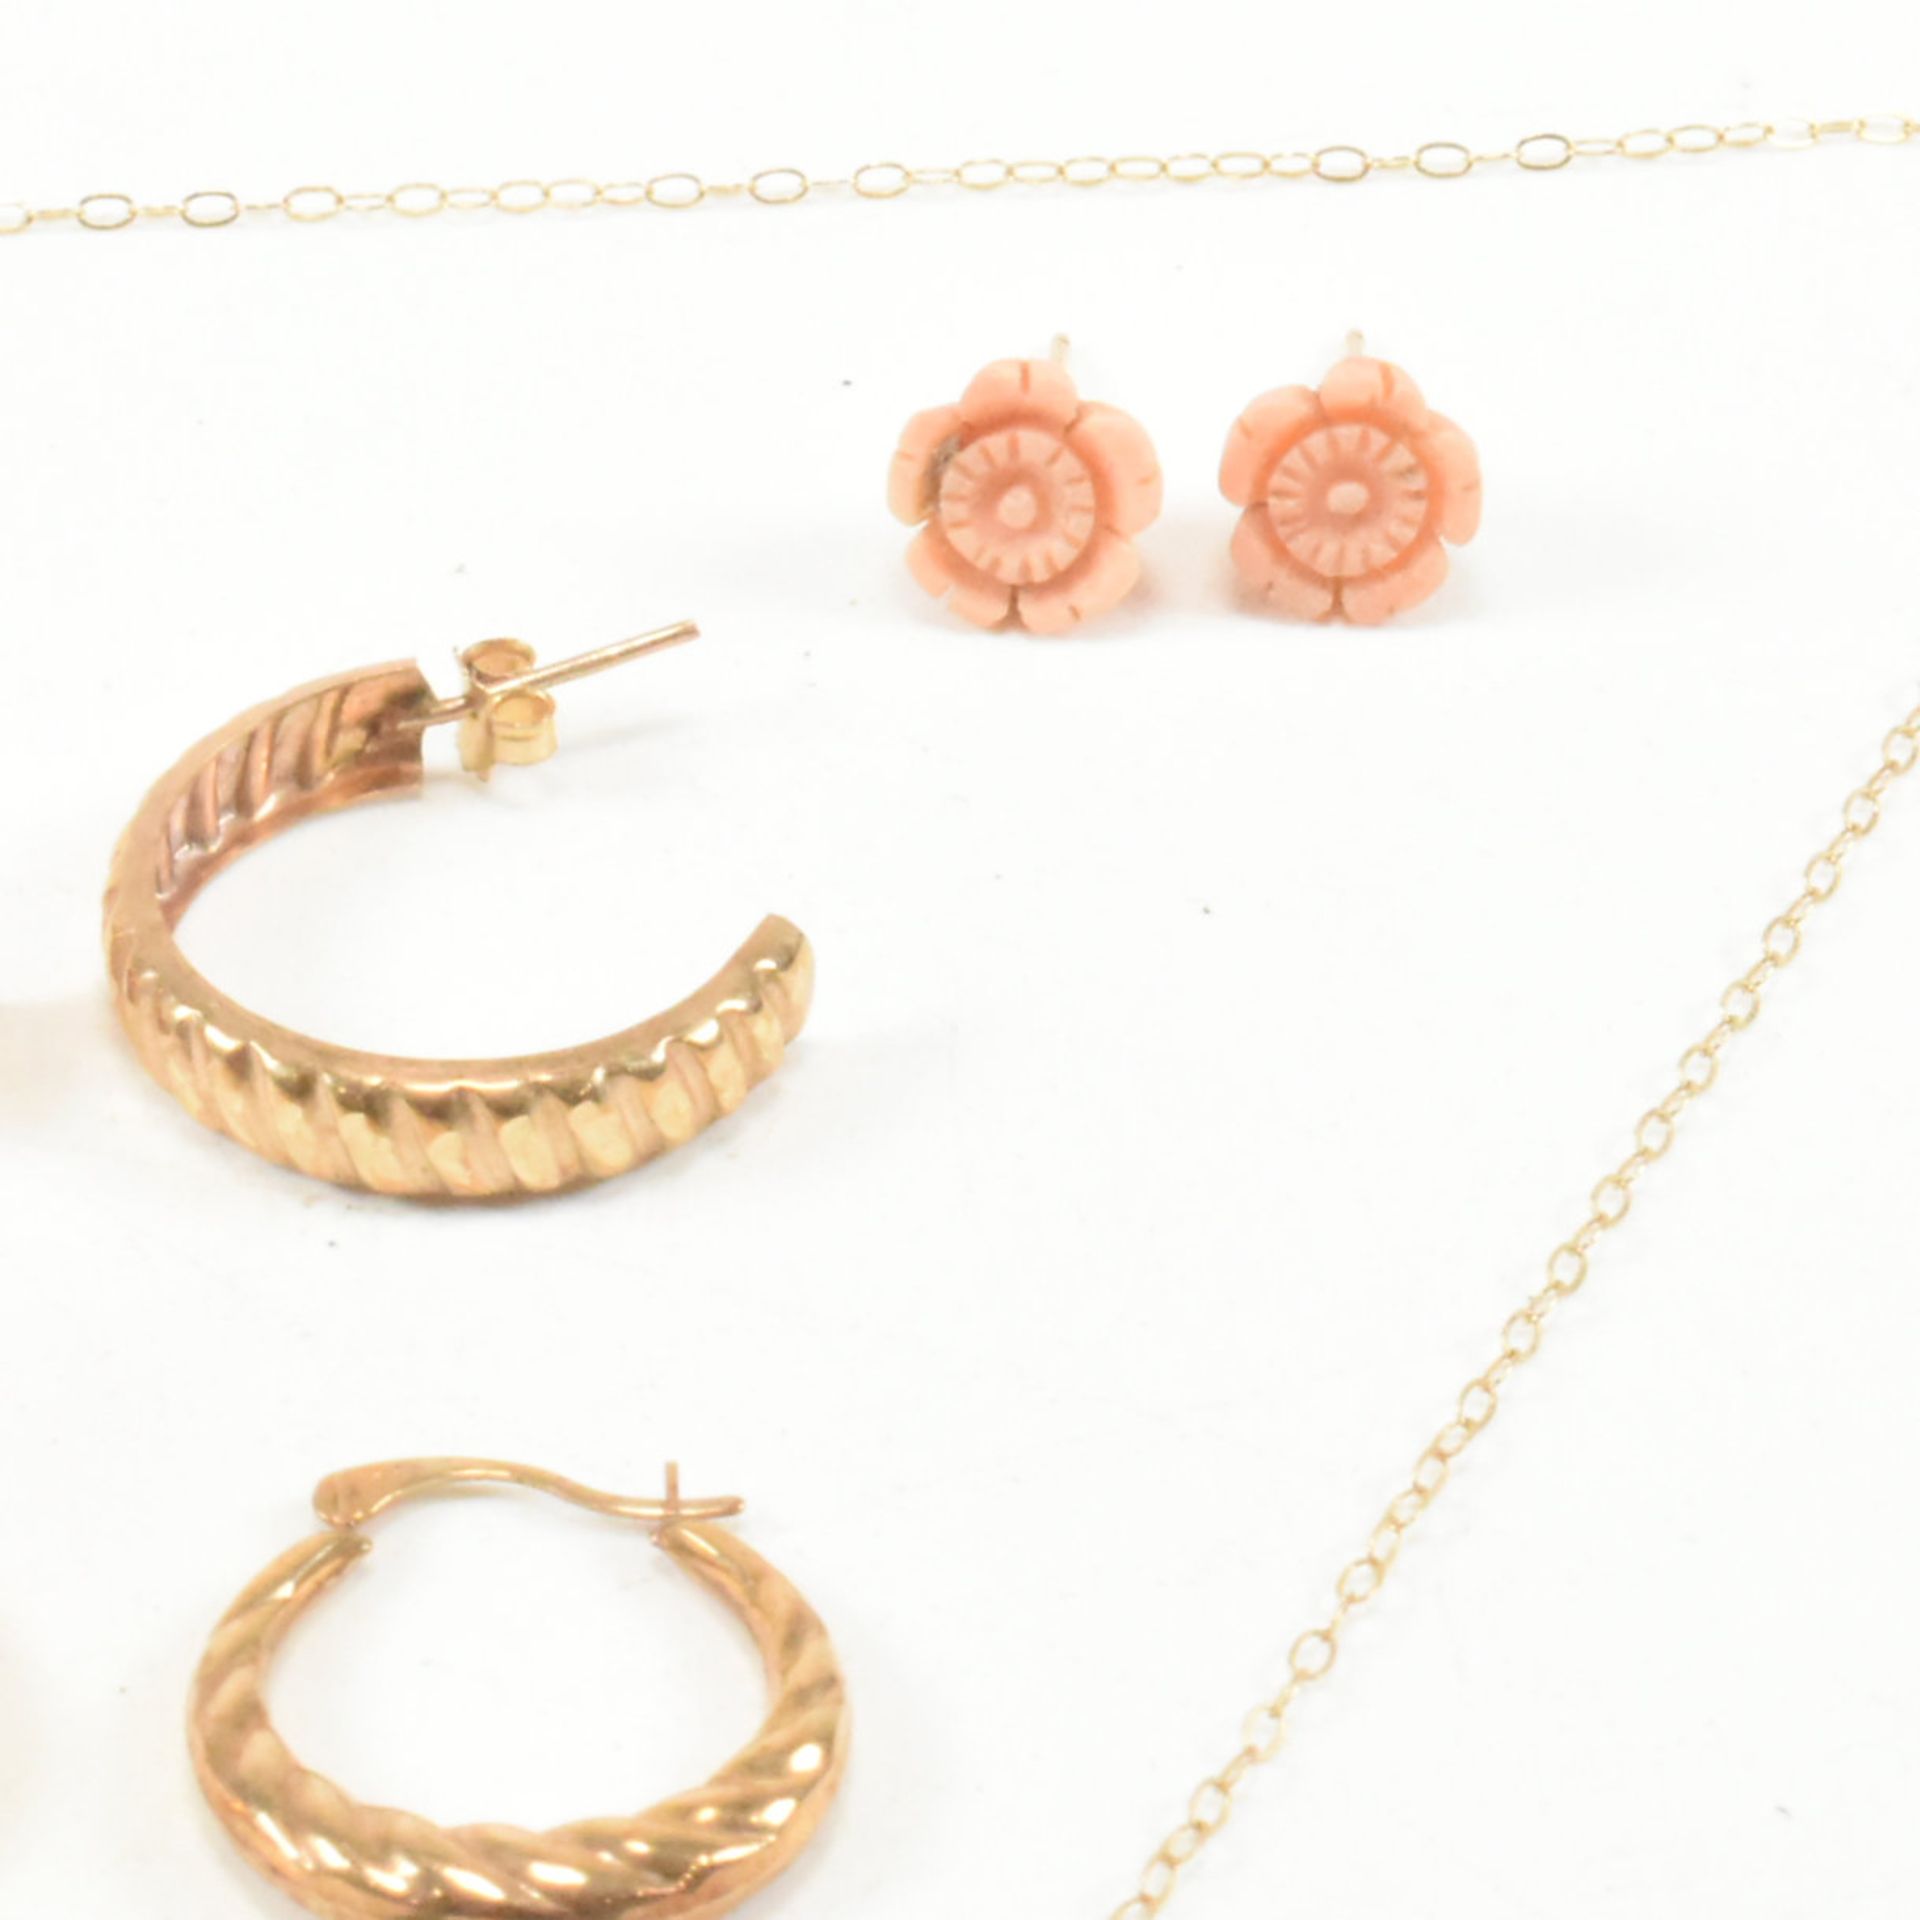 FOUR PAIRS OF 9CT GOLD EARRINGS & A 9CT GOLD PENDANT NECKLACE - Image 3 of 8